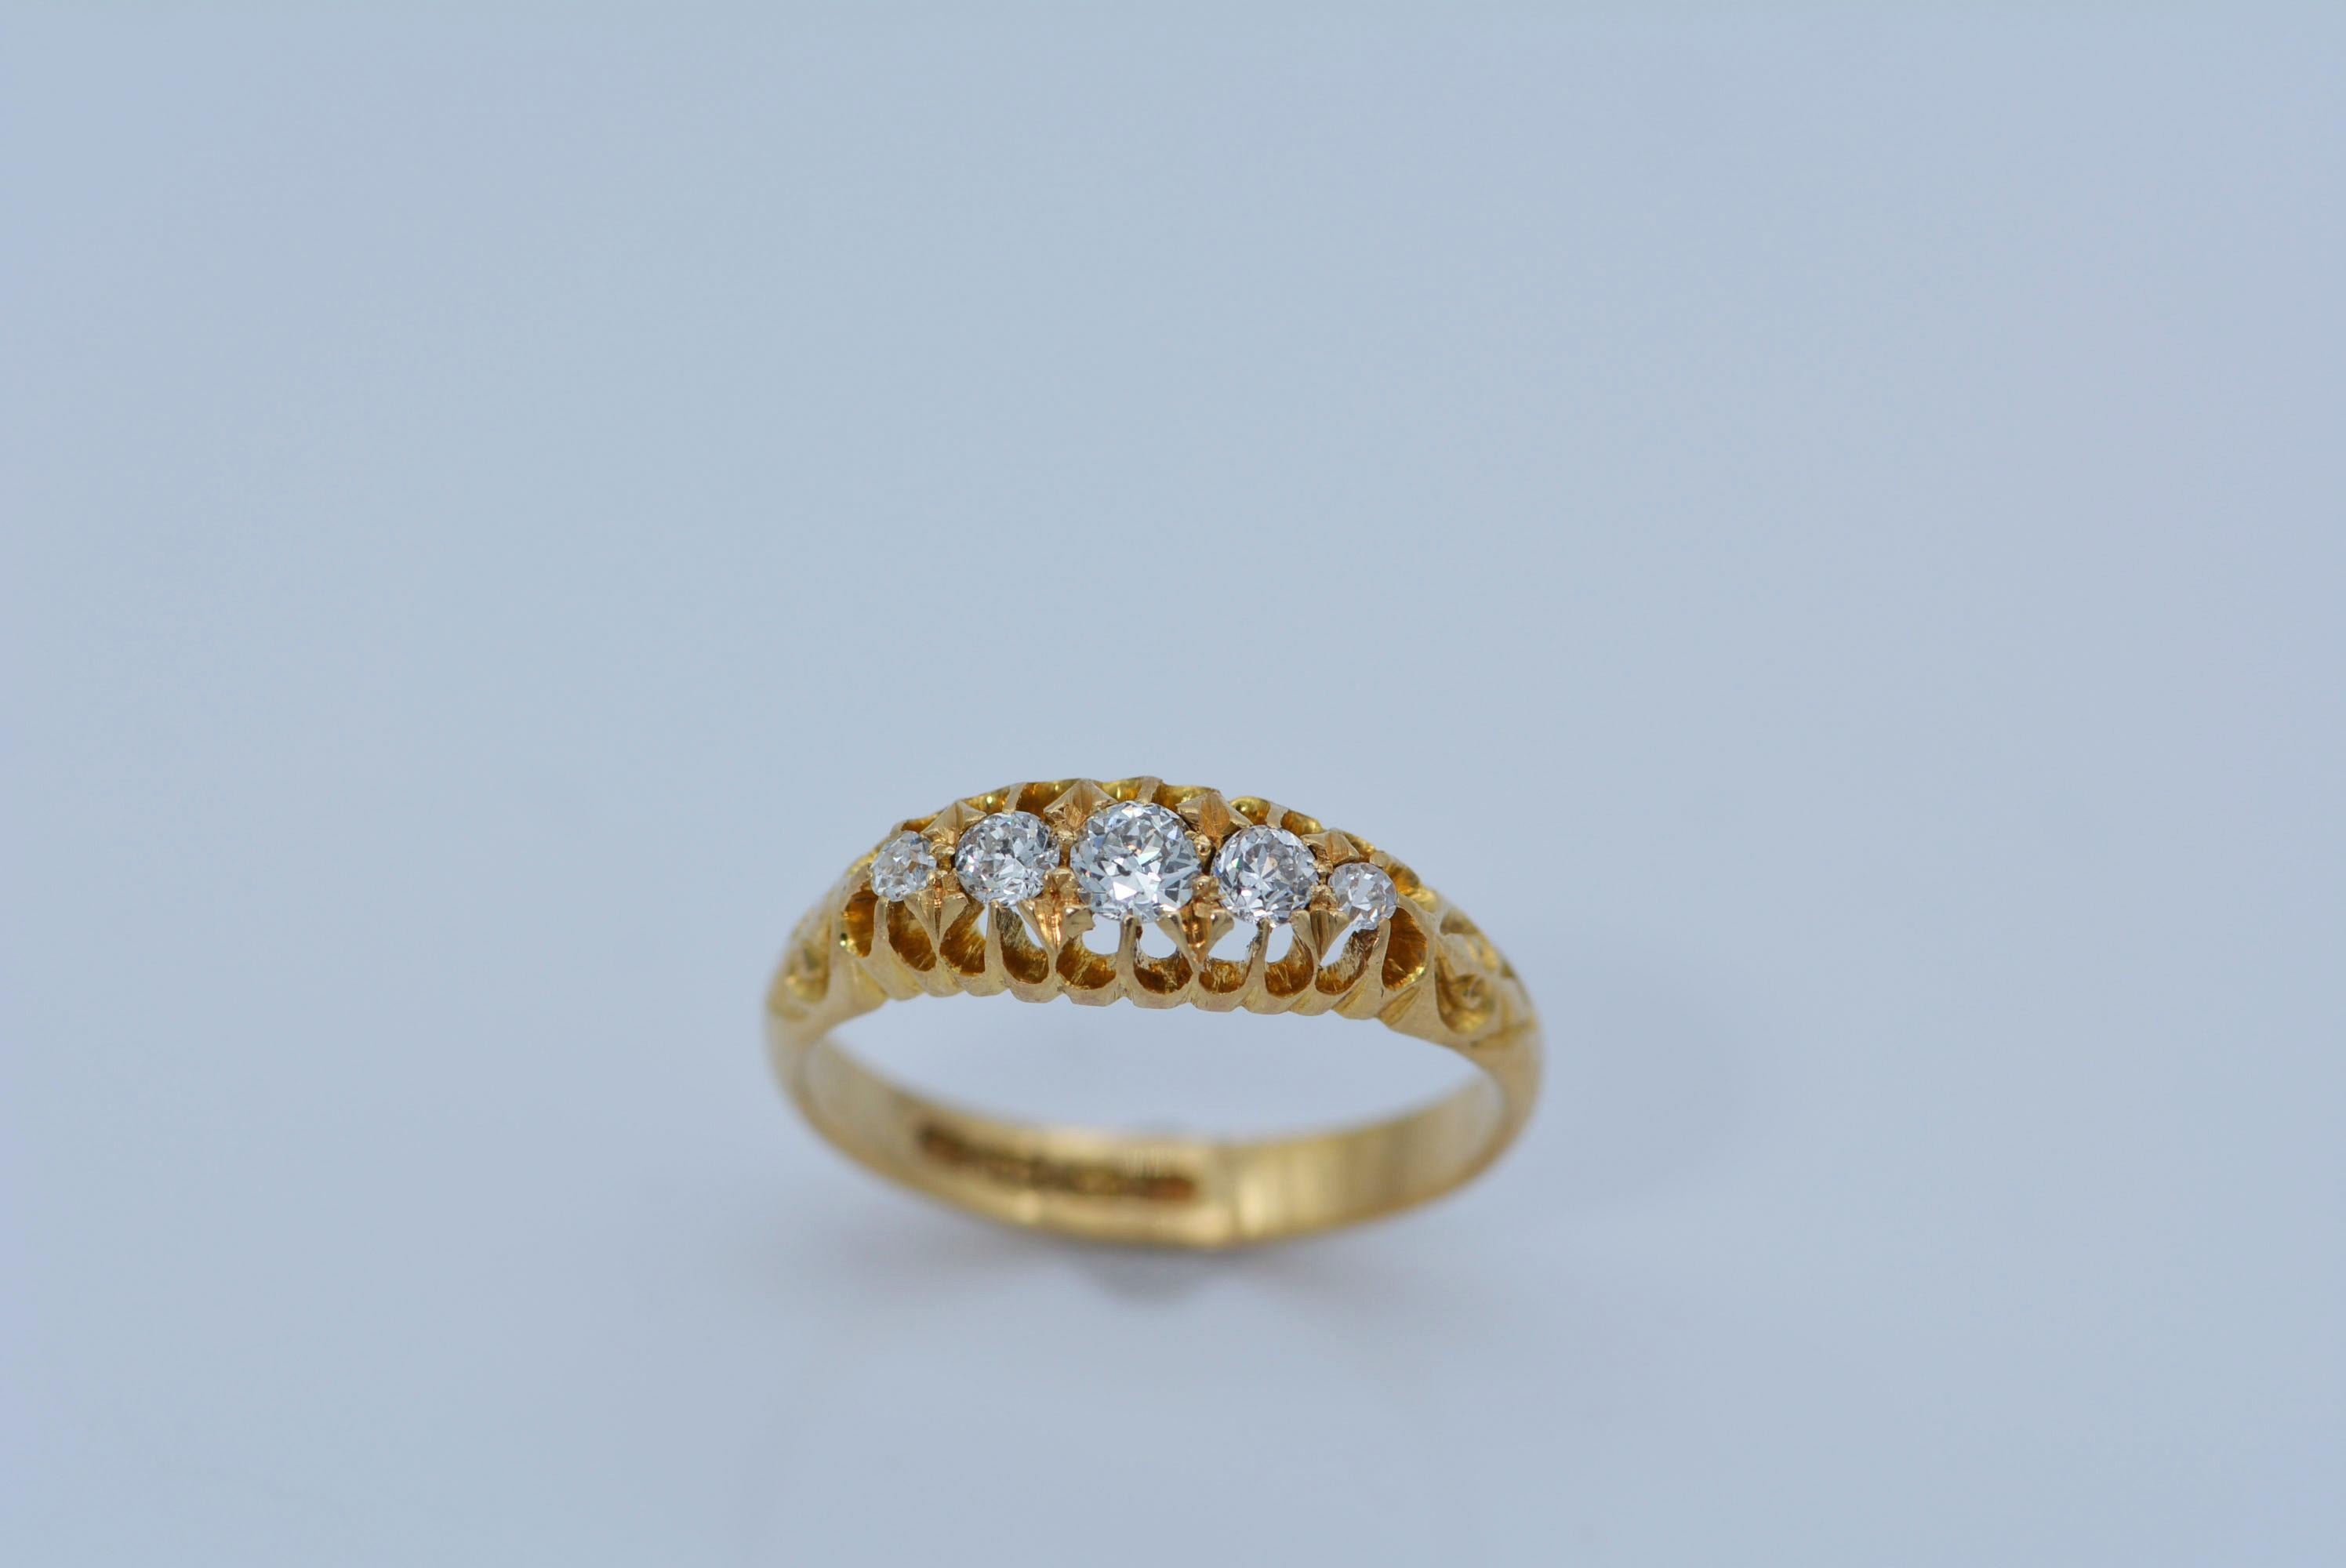 This buttery yellow gold ring of english origin contains five antique diamonds that are graduating in size. 
The largest diamond is set in the center of the ring.

The handmade band is 18 karat yellow gold and has beautiful carved prongs acting as